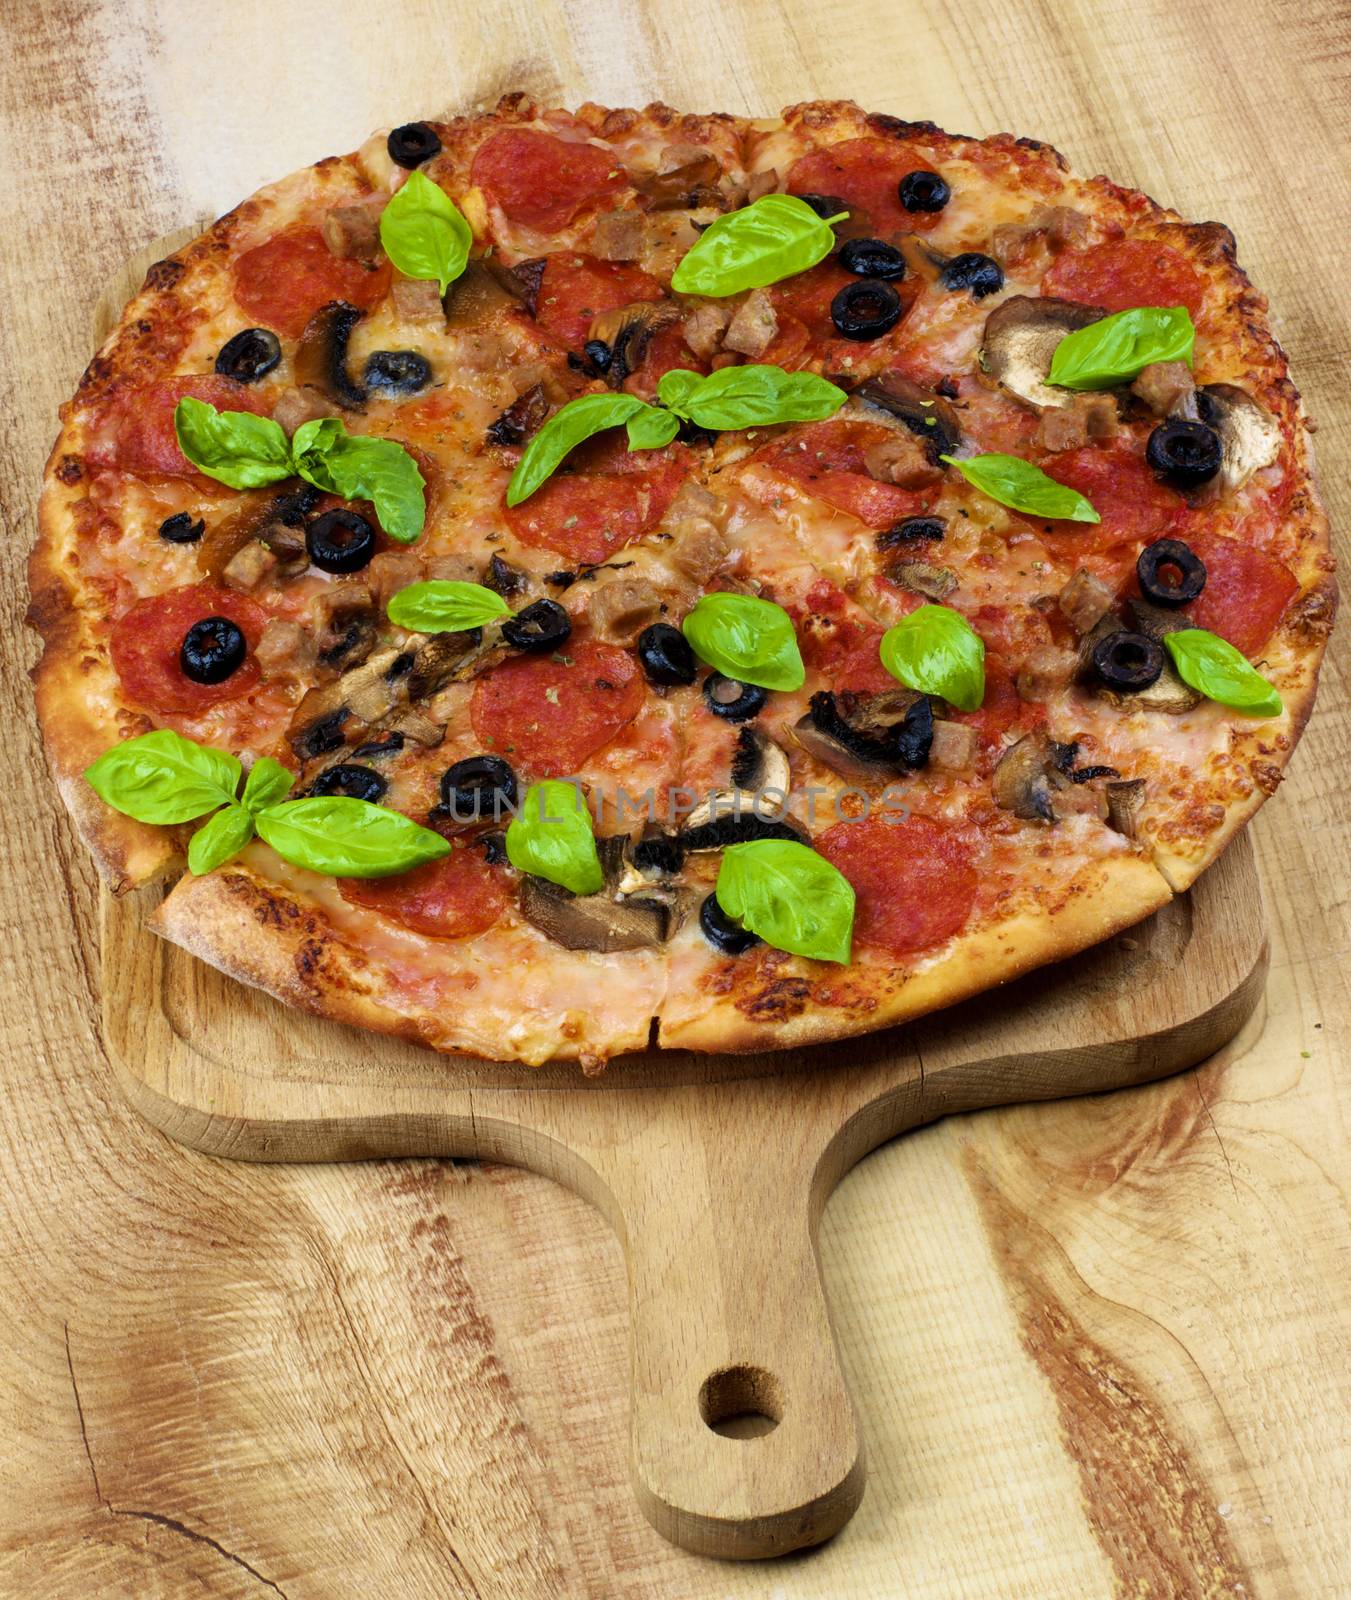 Homemade Pepperoni Pizza with Black Olives, Mushrooms, Ham and Basil Leafs on Wooden Cutting Board closeup on Wooden background